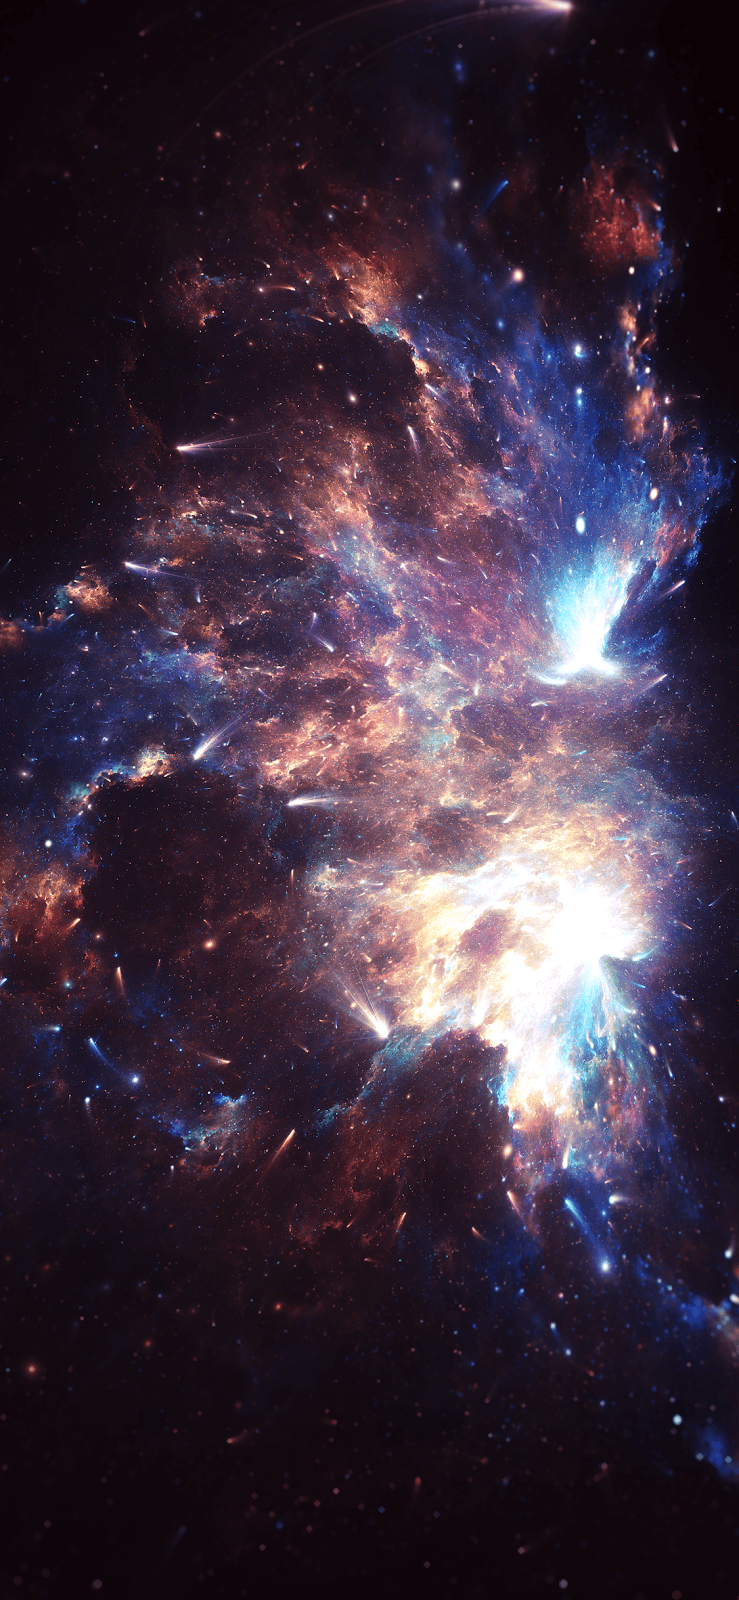 Colorful Nebula (iPhone X) #wallpaper #iphone #android #background